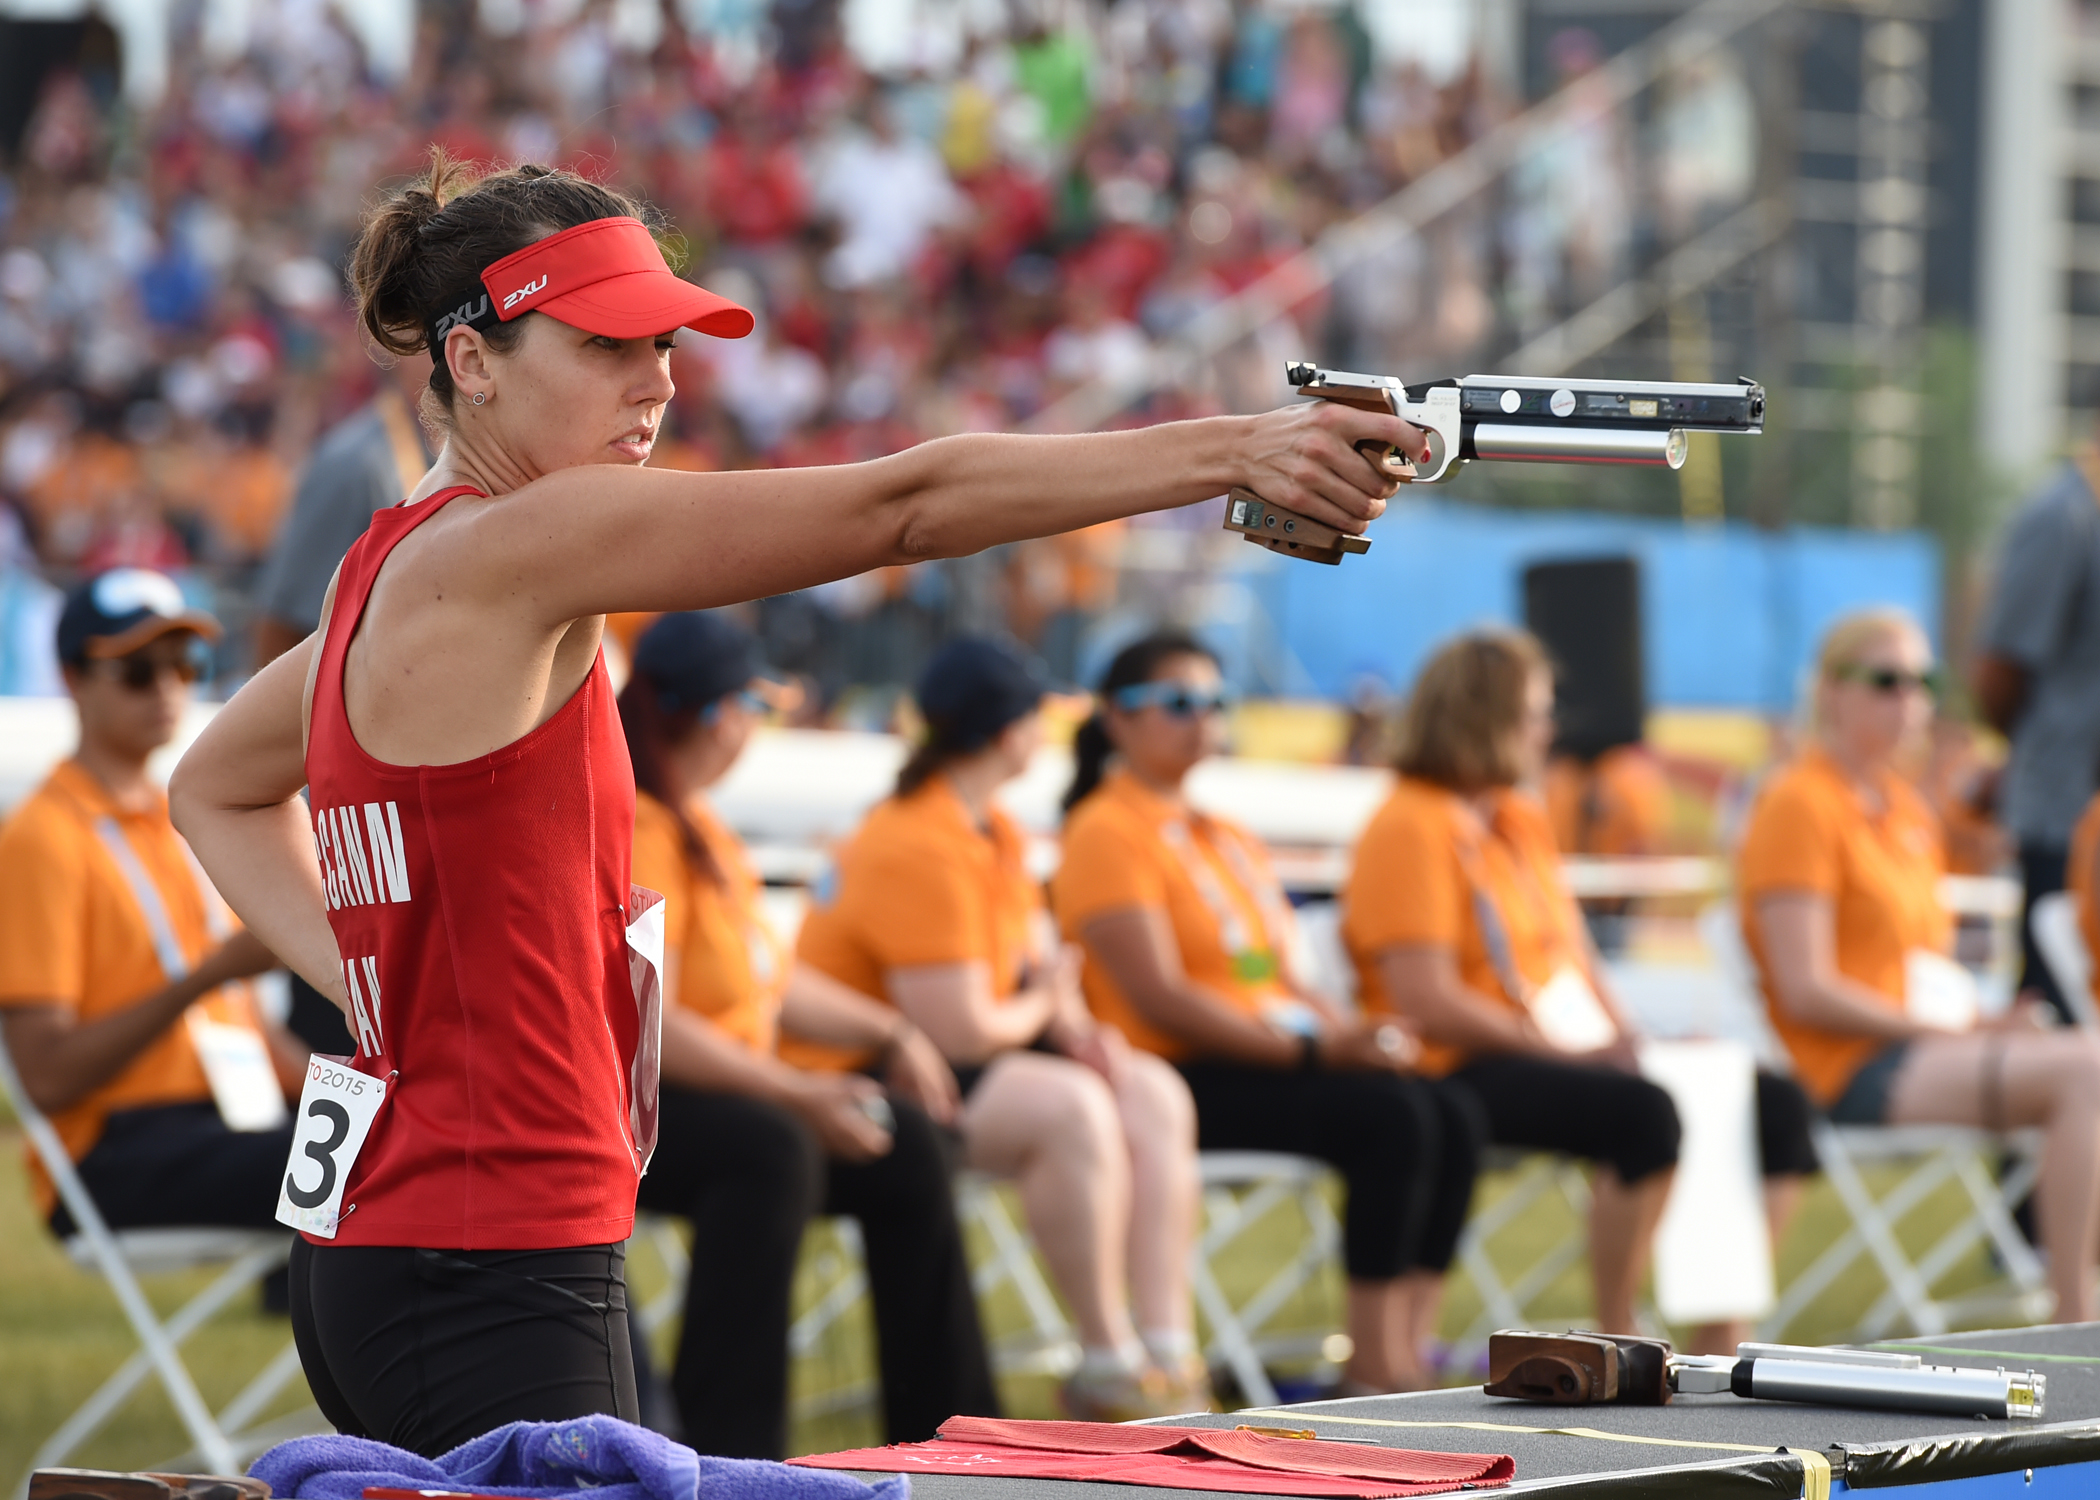 Melanie McCann competes in the Modern Pentathlon competition at the Toronto 2015 Pan Am Games. Jay Tse/COC